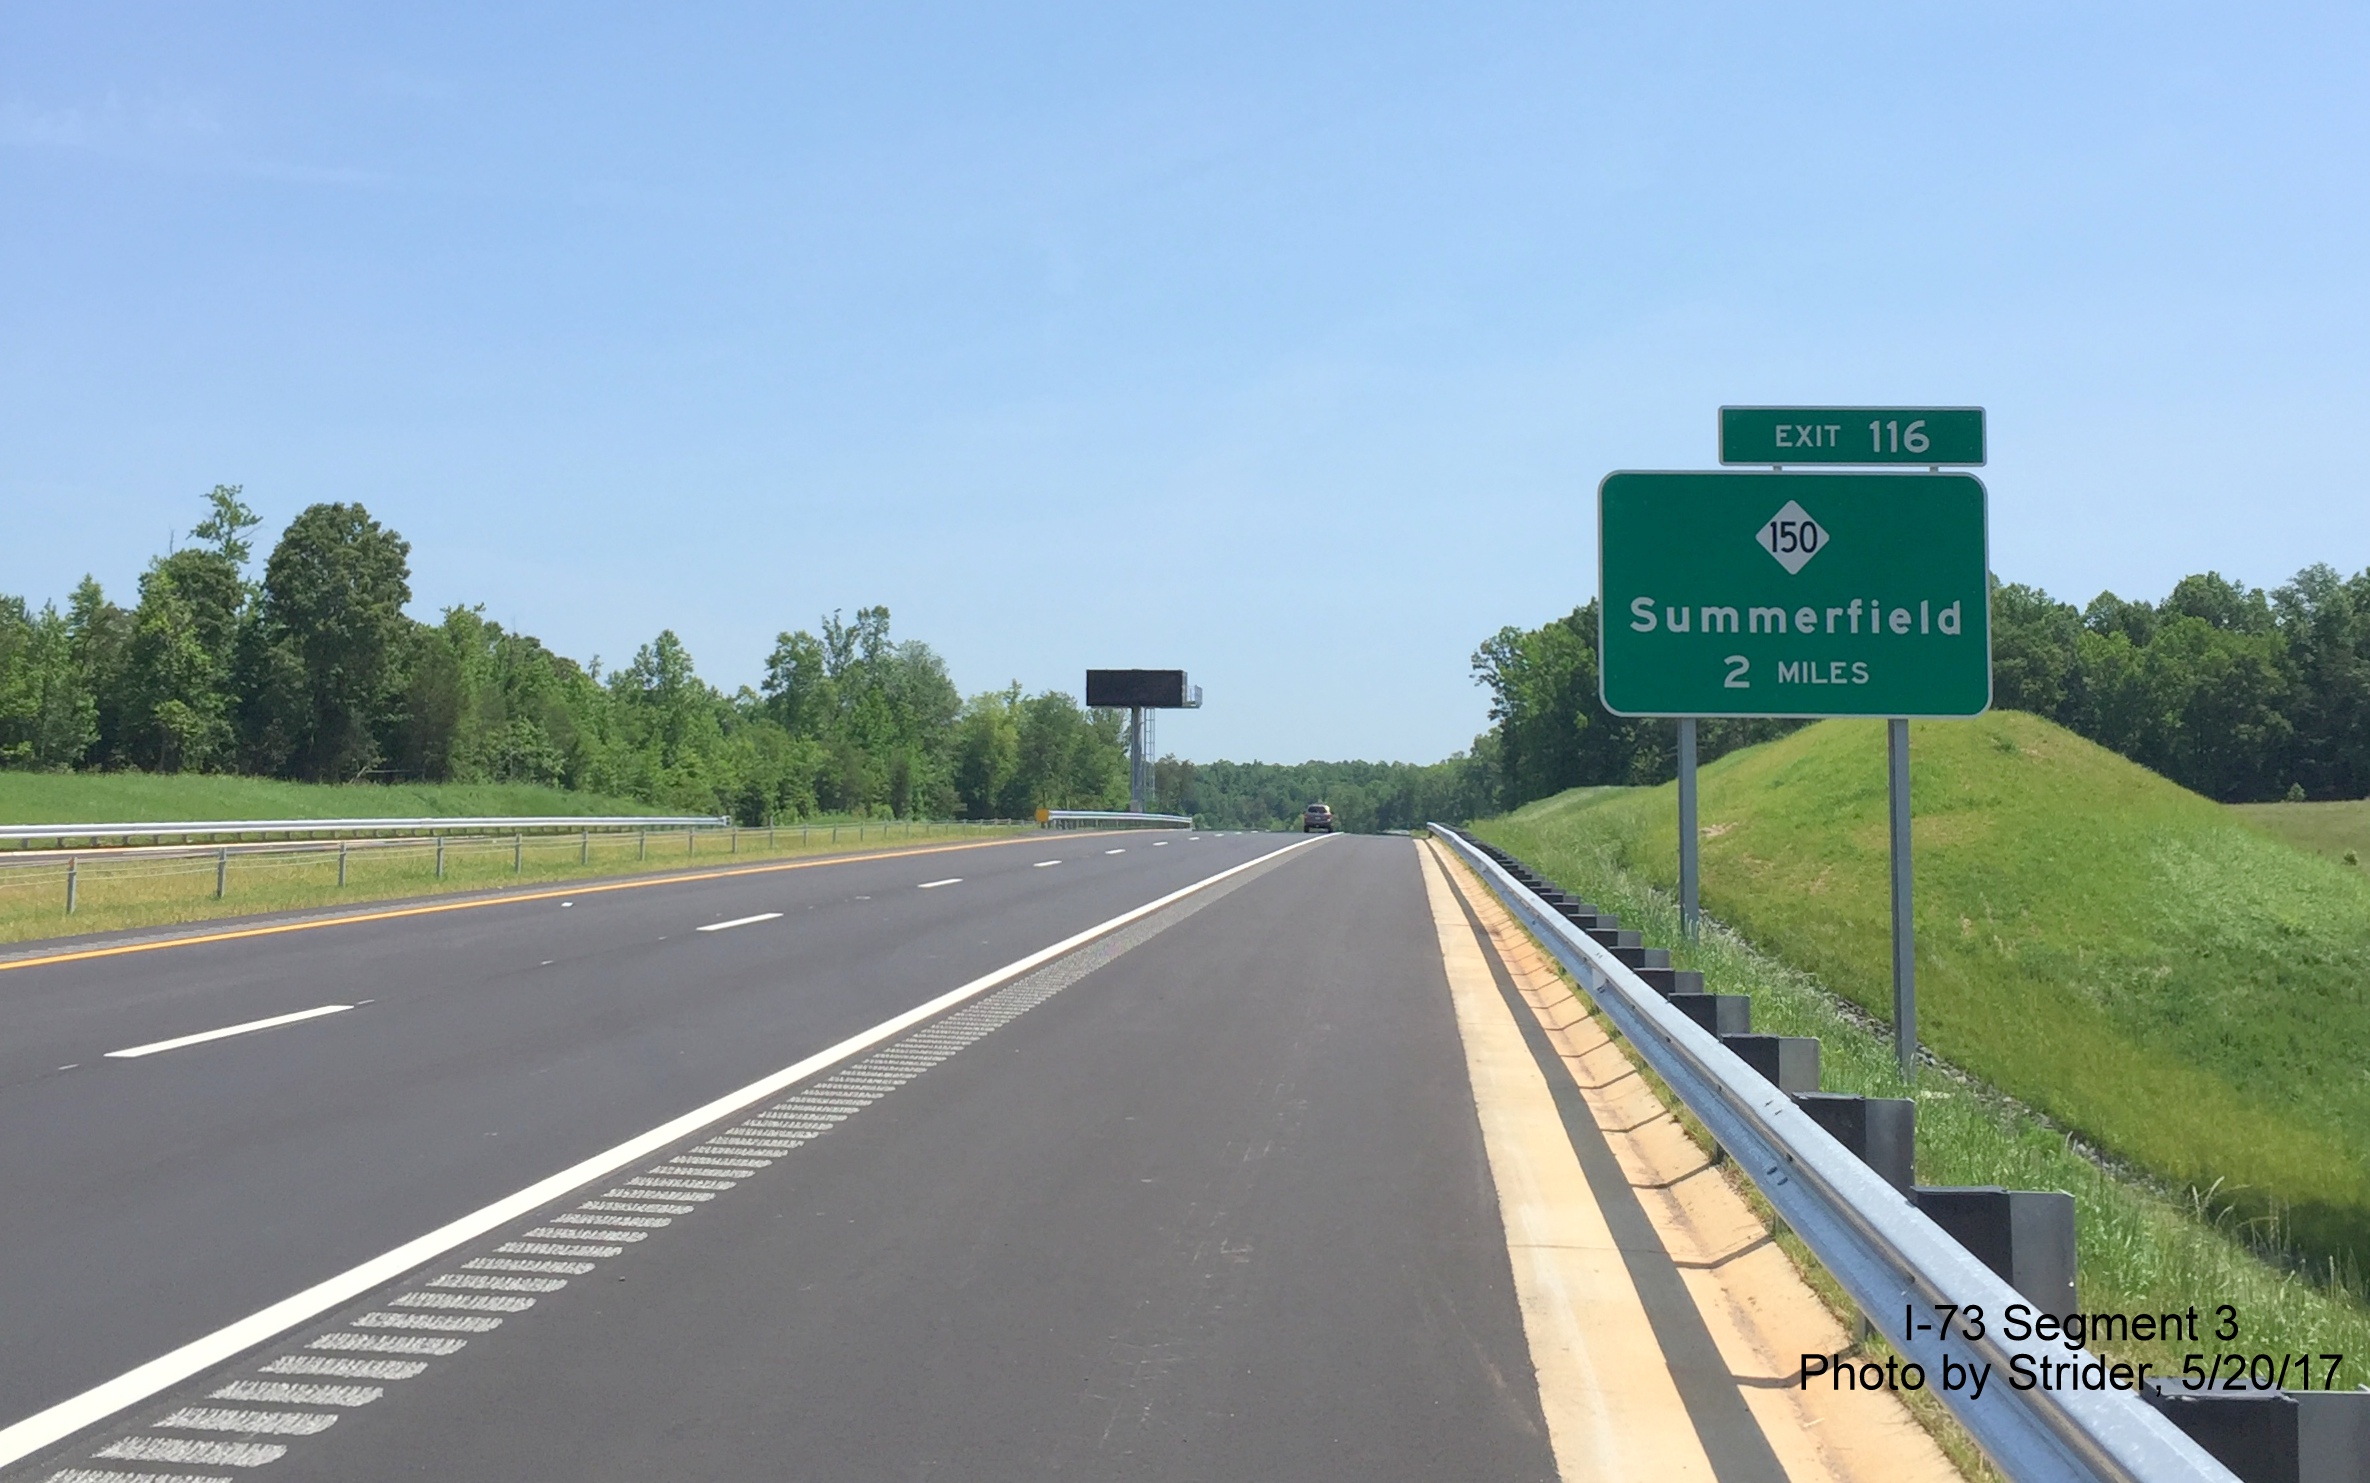 Image taken of first exit sign for NC 150 on newly opened I-73 North in Summerfield, by Strider